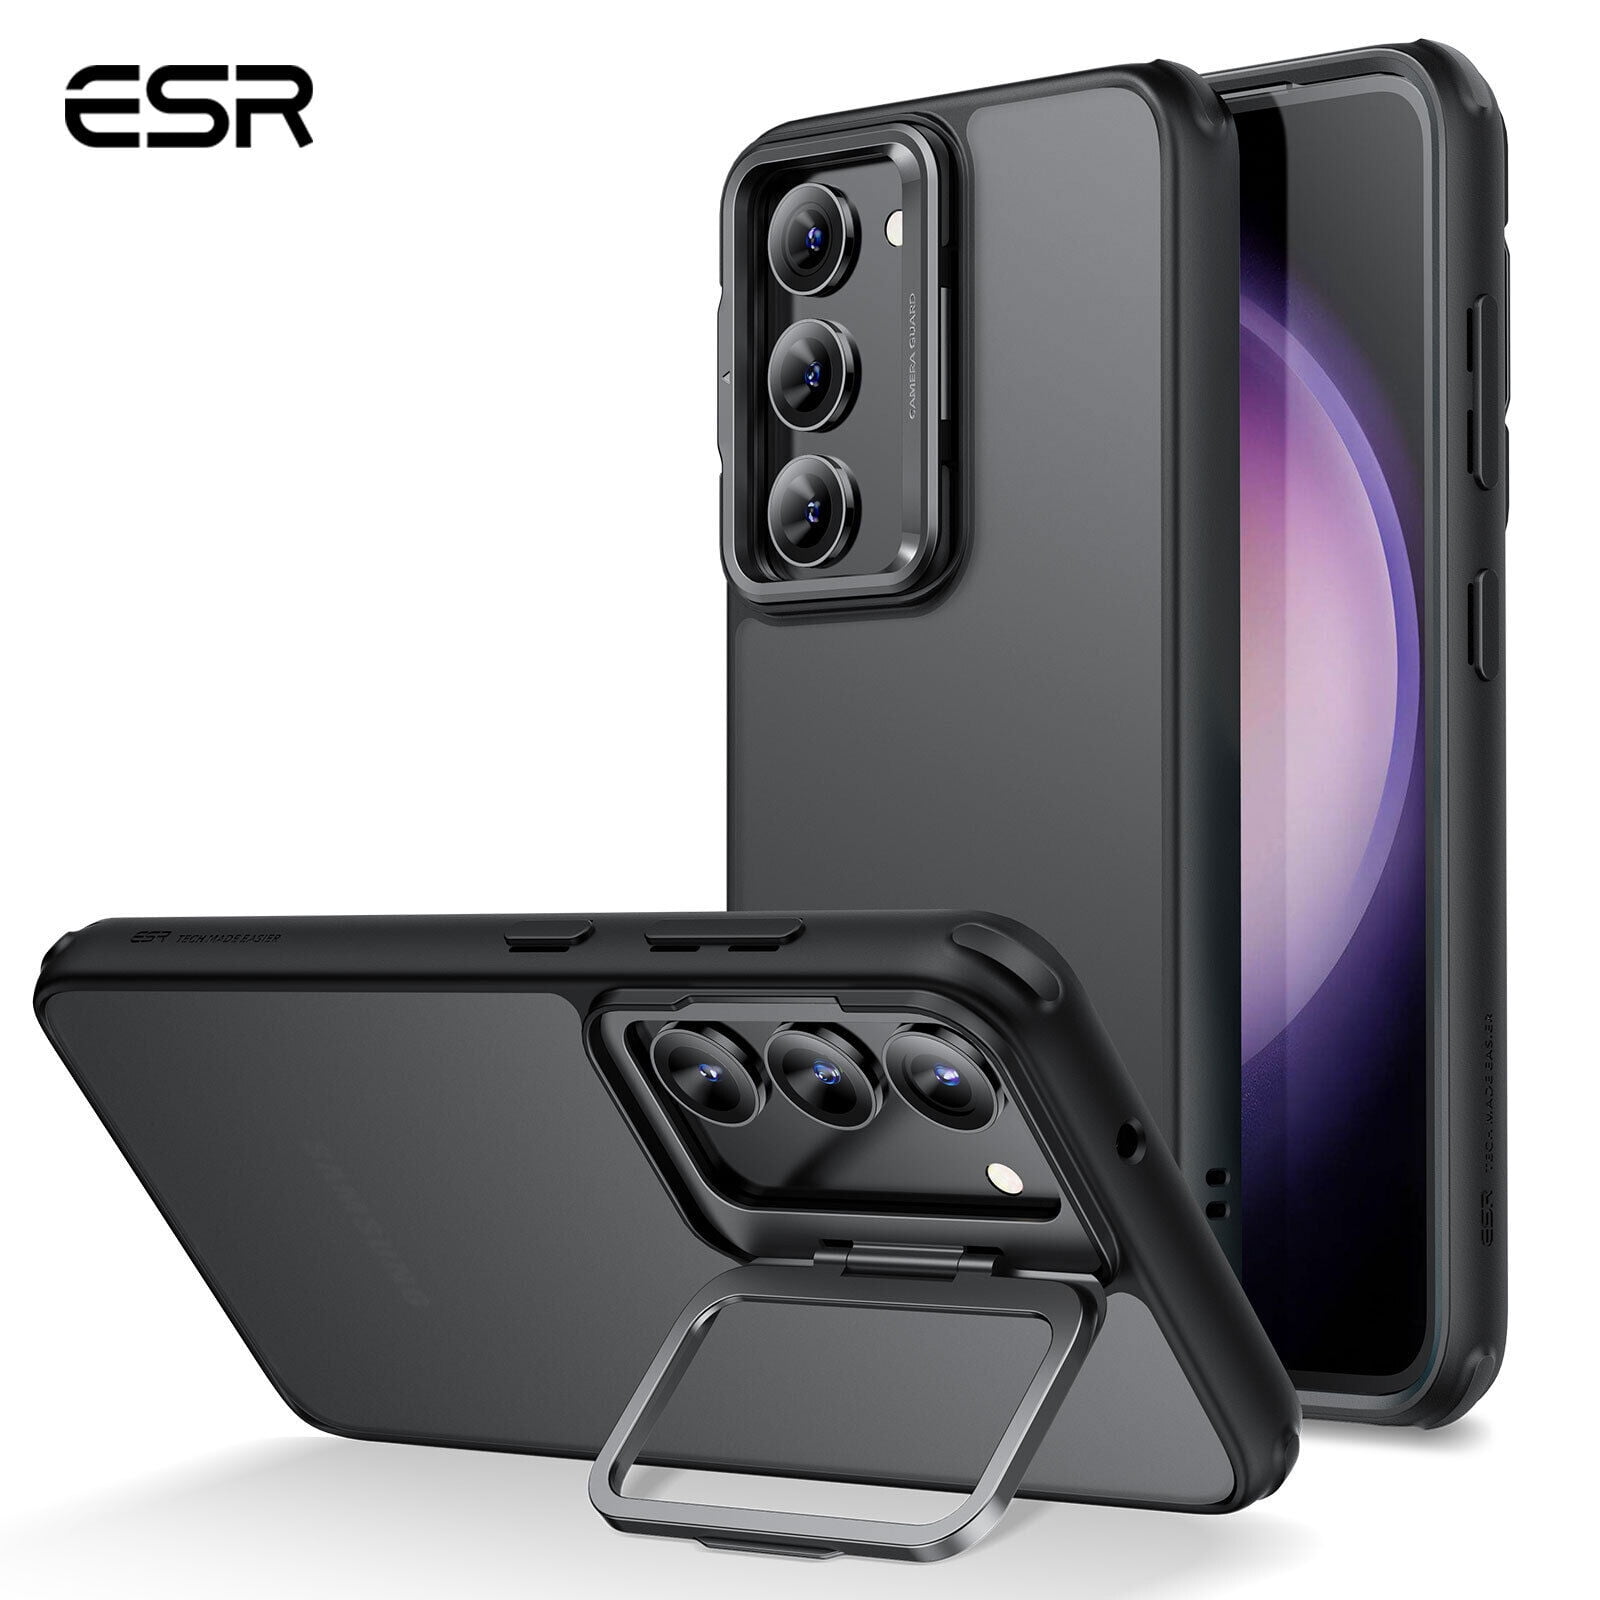  ESR for Samsung S23 Ultra Case, Compatible with MagSafe,  Magnetic Case for Samsung Galaxy S23 Ultra, Military-Grade Protection,  Yellowing Resistant, Classic Hybrid Case (HaloLock), Clear Black